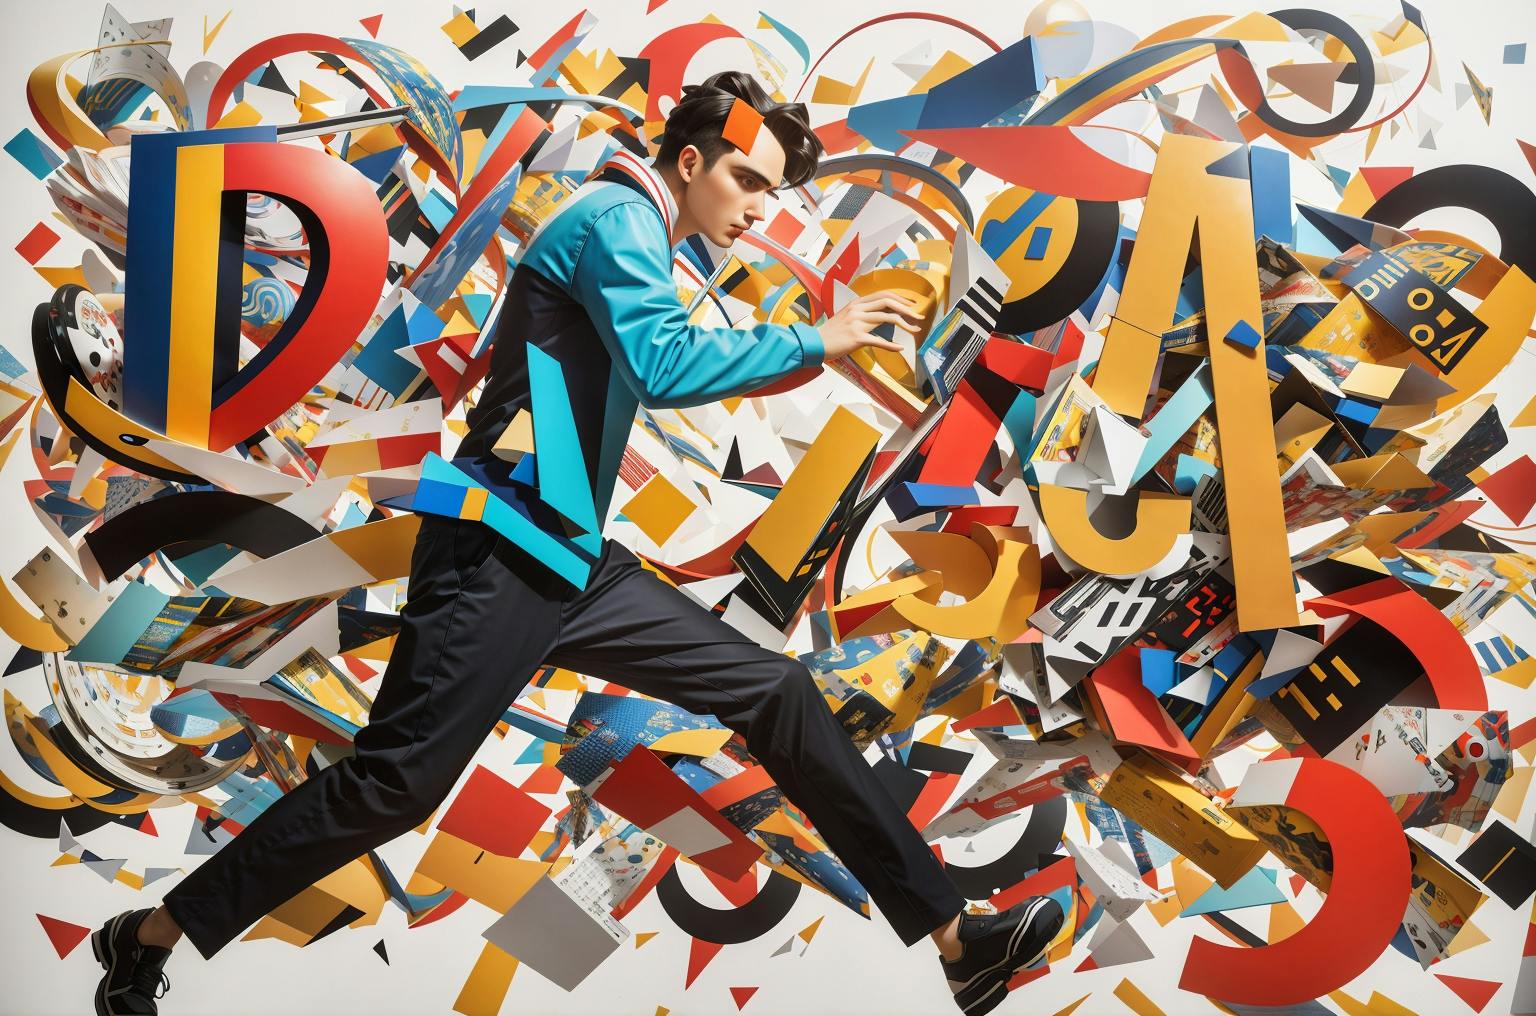 image of a person running with lots of colorful shapes and letters surrounding him in a chaotic explosion